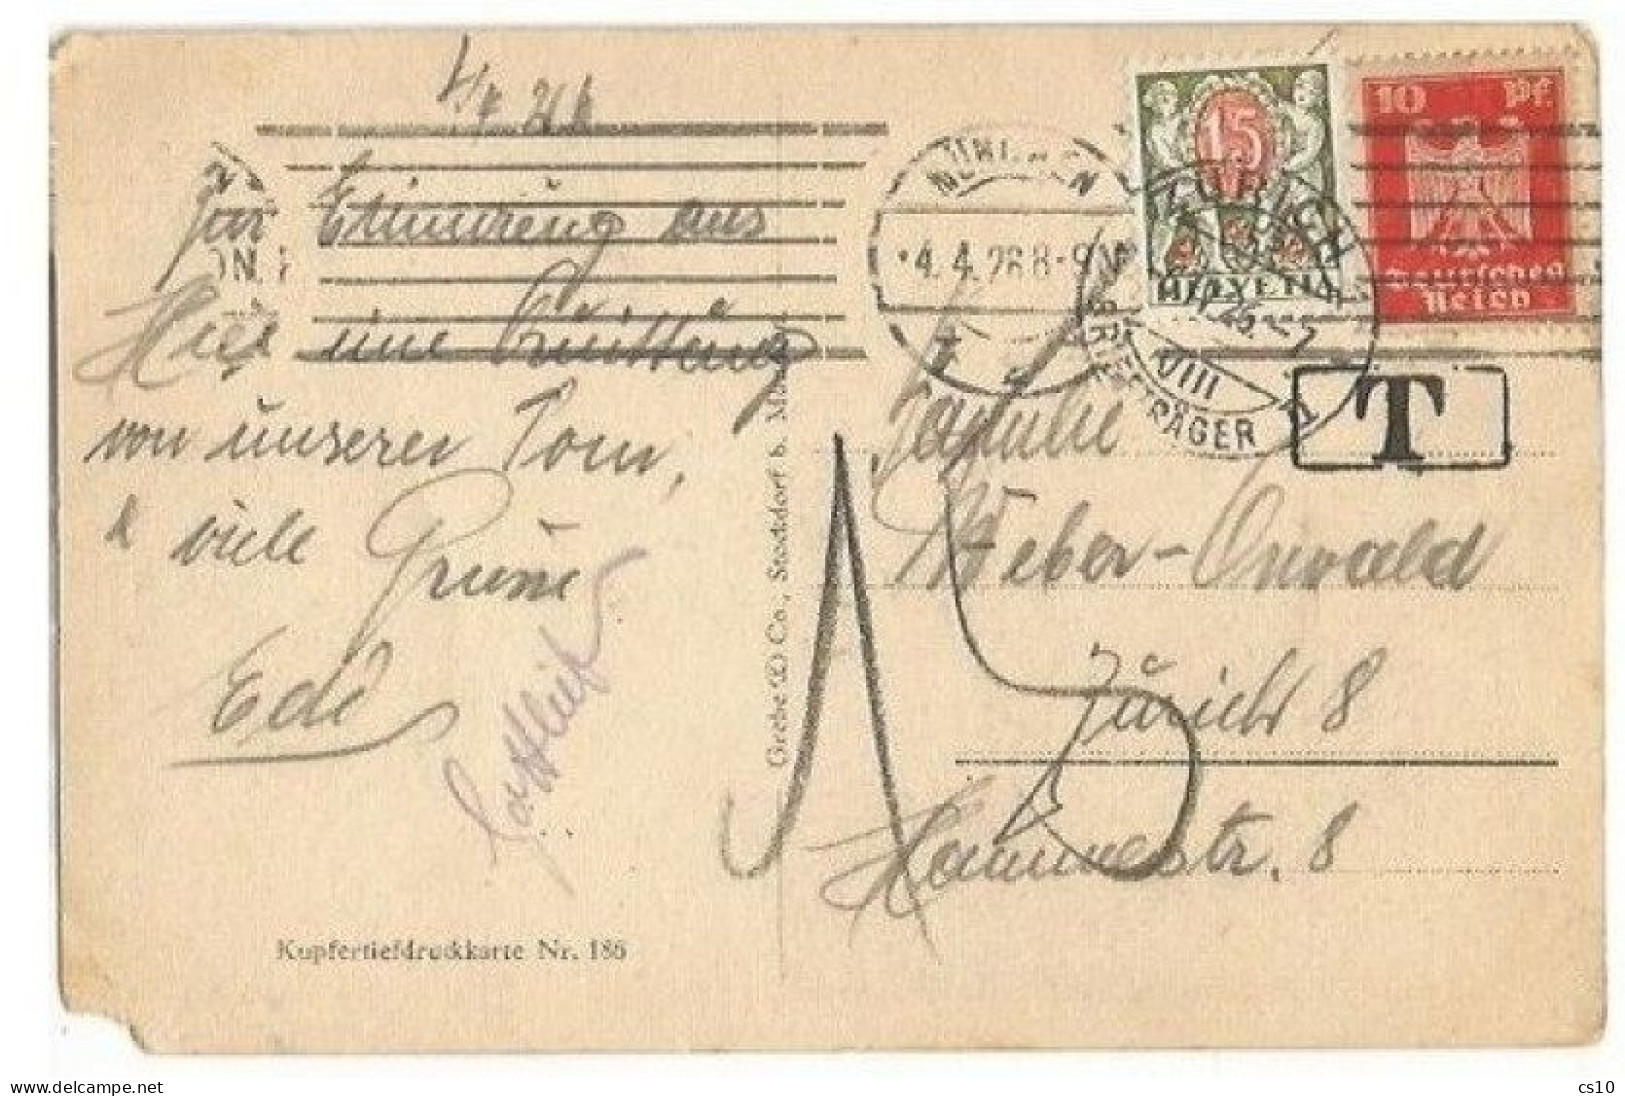 Suisse 6apr1926 Postage Due C.15 Taxing Pcard Munchen 4apr With Eagle Pf10 Solo To Zurich - Portomarken